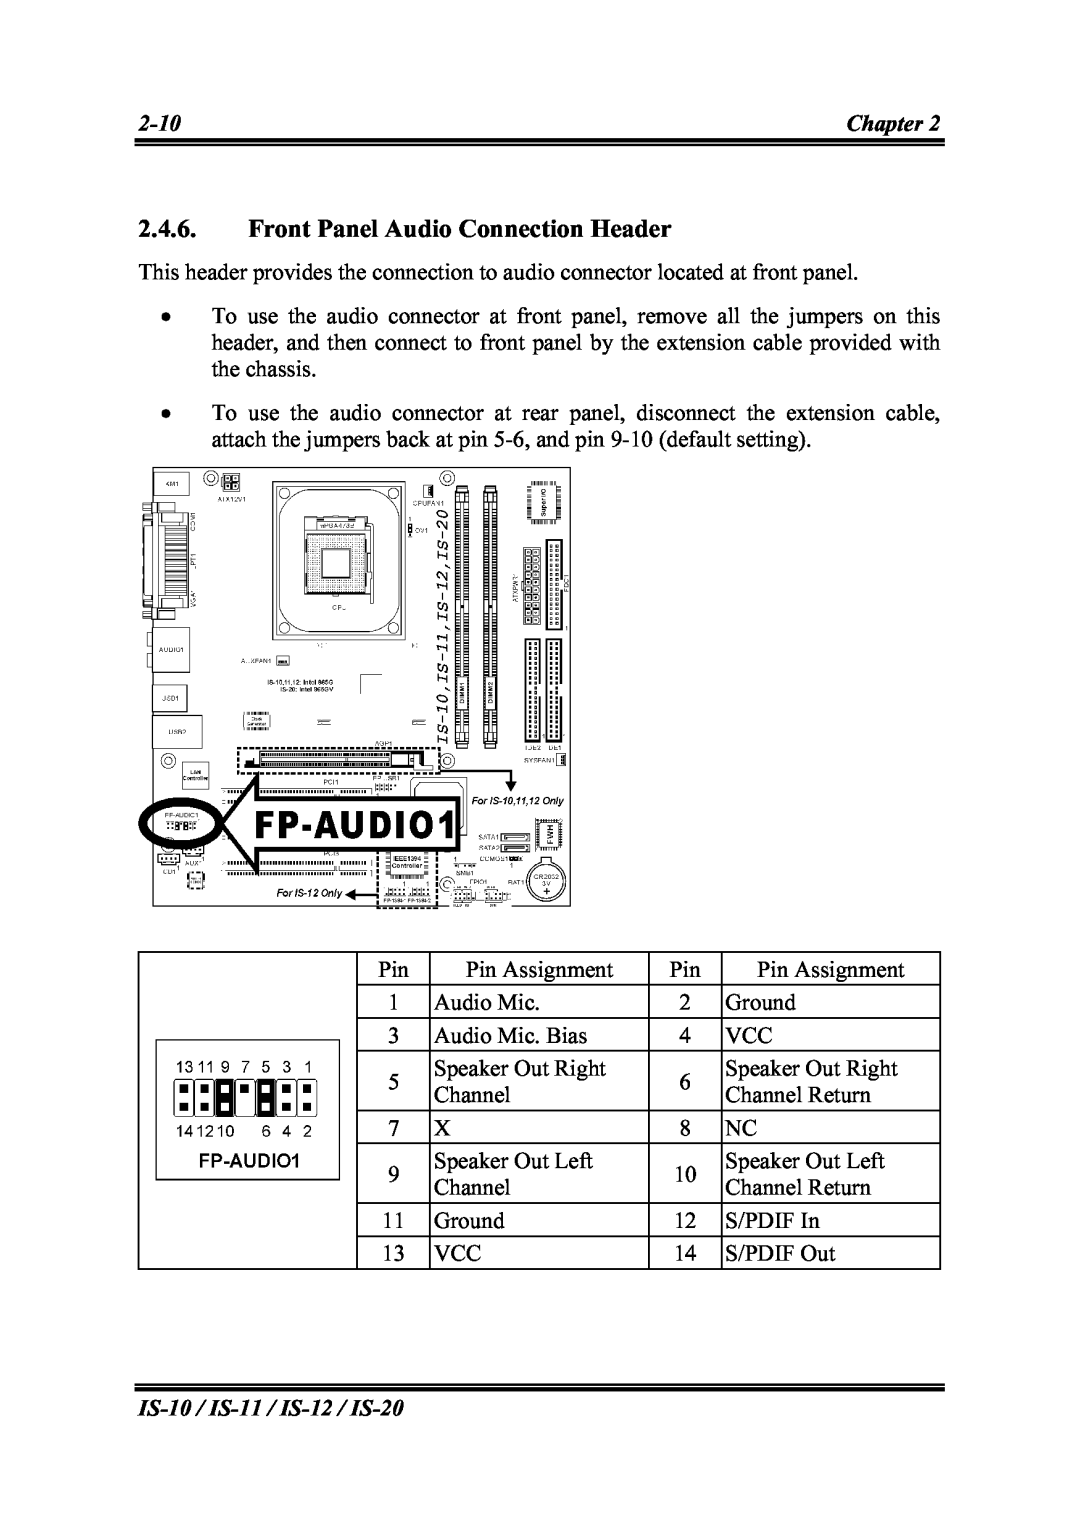 Abit IS-10, IS-12, IS-20, IS-11 user manual Front Panel Audio Connection Header 